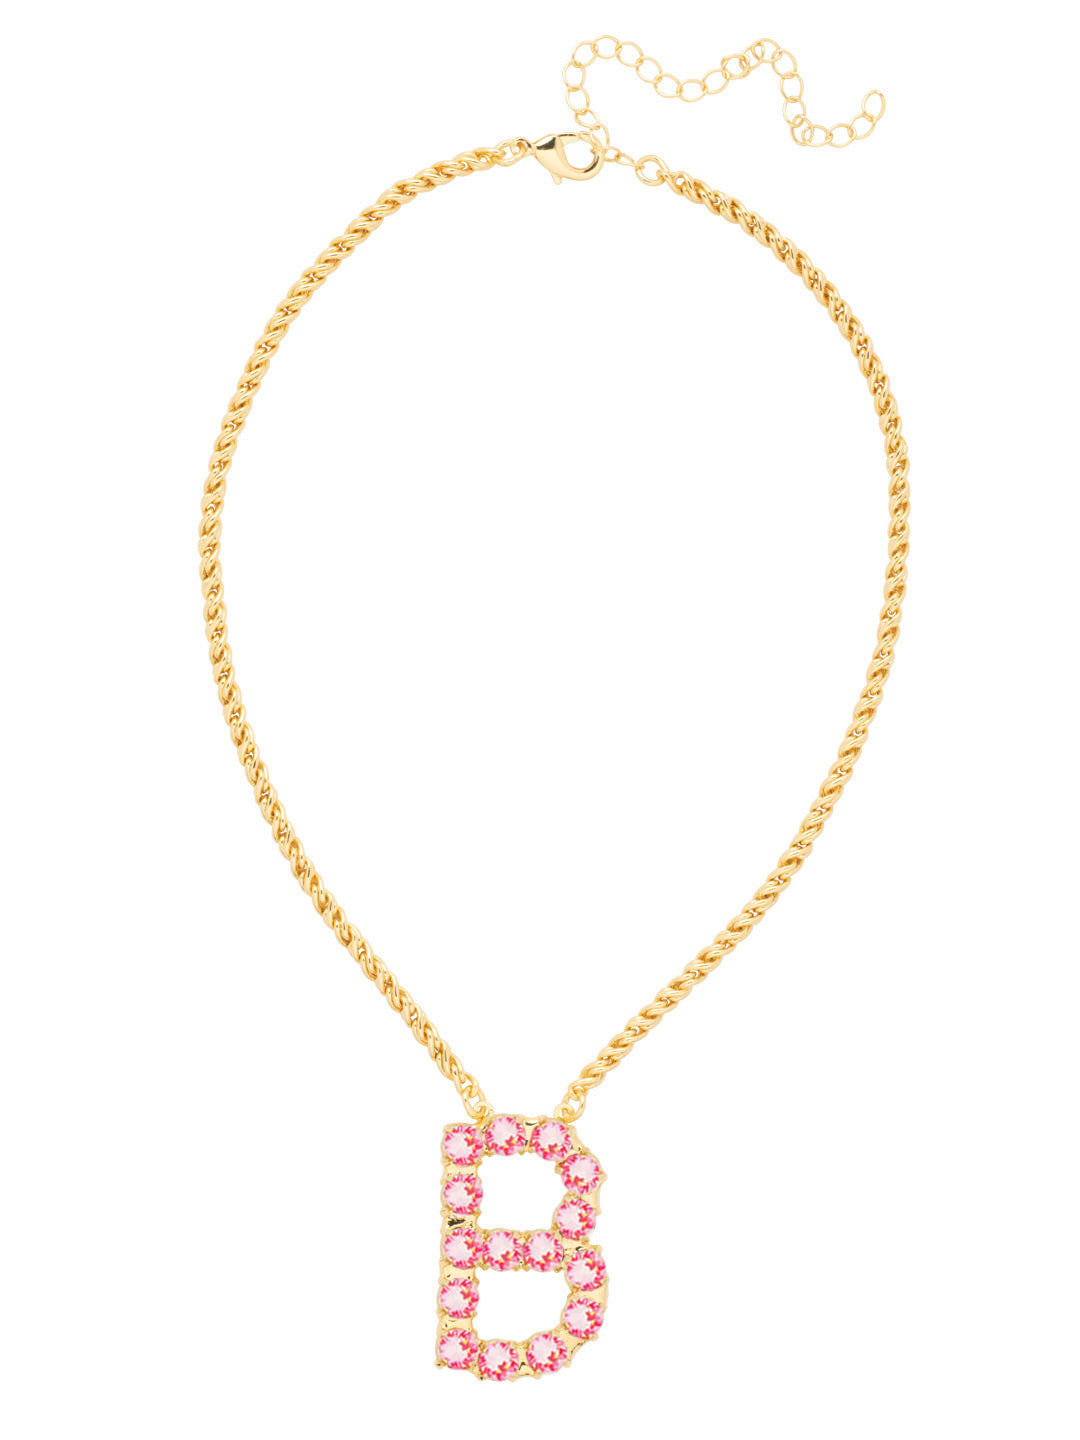 B Initial Rope Pendant Necklace - NFK21BGETP - <p>The Initial Rope Pendant Necklace features a crystal encrusted metal monogram pendant on an adjustable rope chain, secured with a lobster claw clasp. From Sorrelli's Electric Pink collection in our Bright Gold-tone finish.</p>